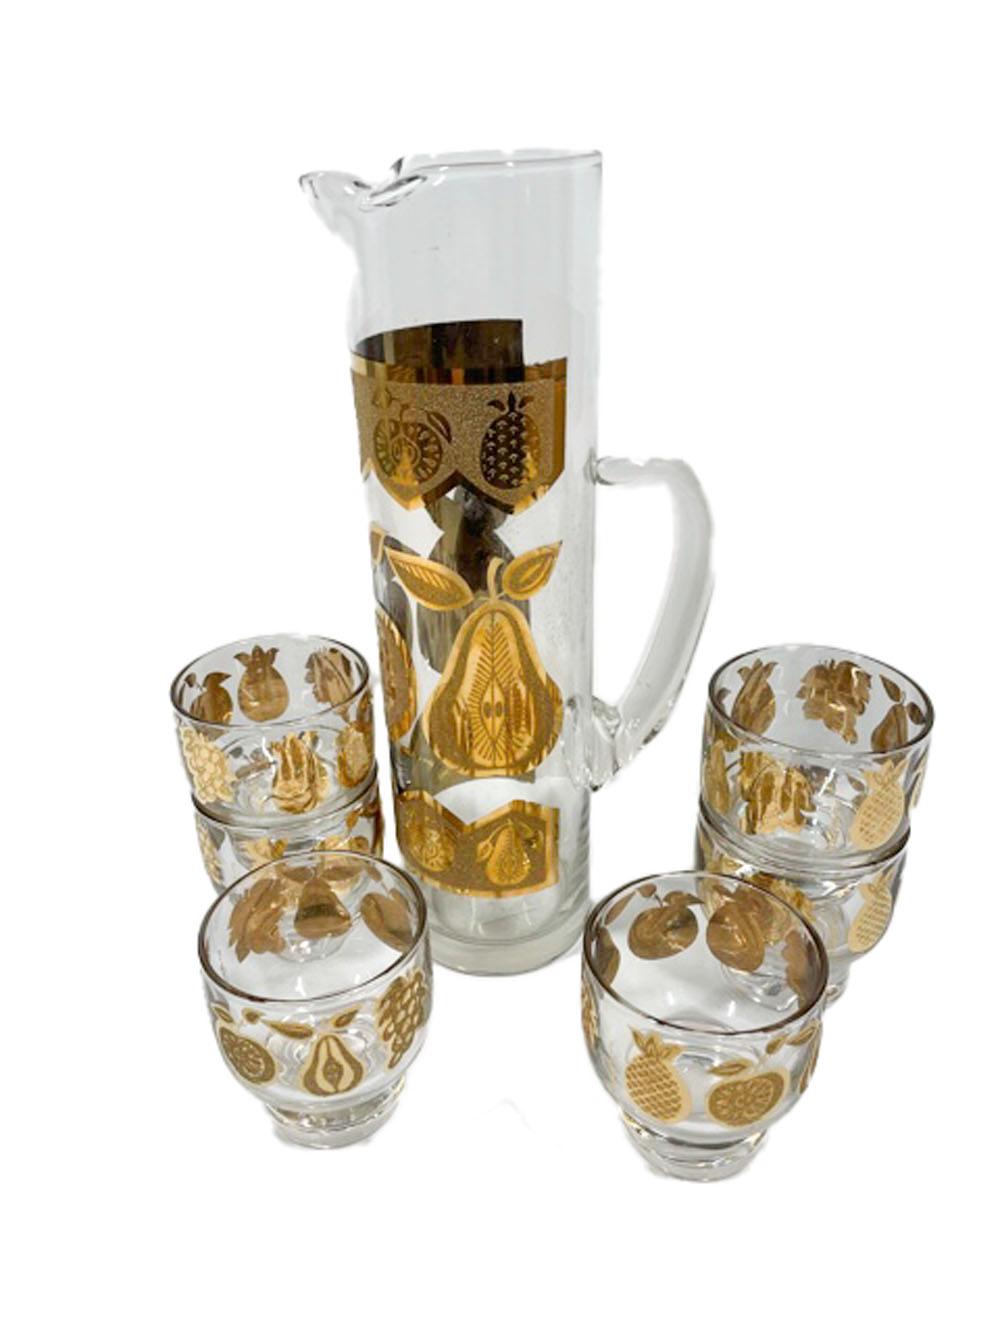 Mid-Century Modern cocktail set by Culver in the Florentine pattern, decorated in smooth and textured 22k gold depicting apple, pear, pineapple and grapes. The set consists of a handled cocktail pitcher and six footed (stacking) cocktail glasses.